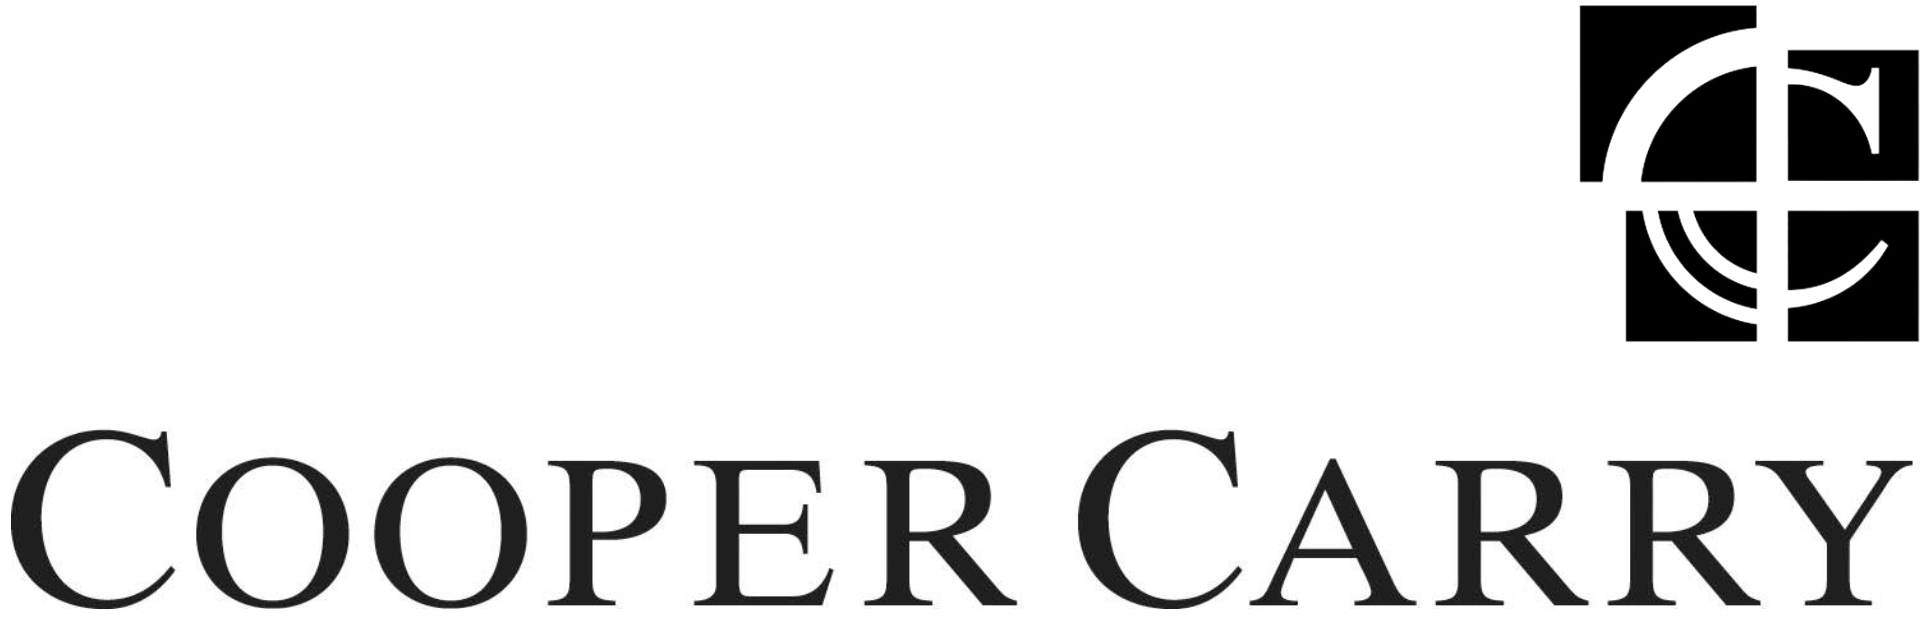 Cooper Carry Logo.png